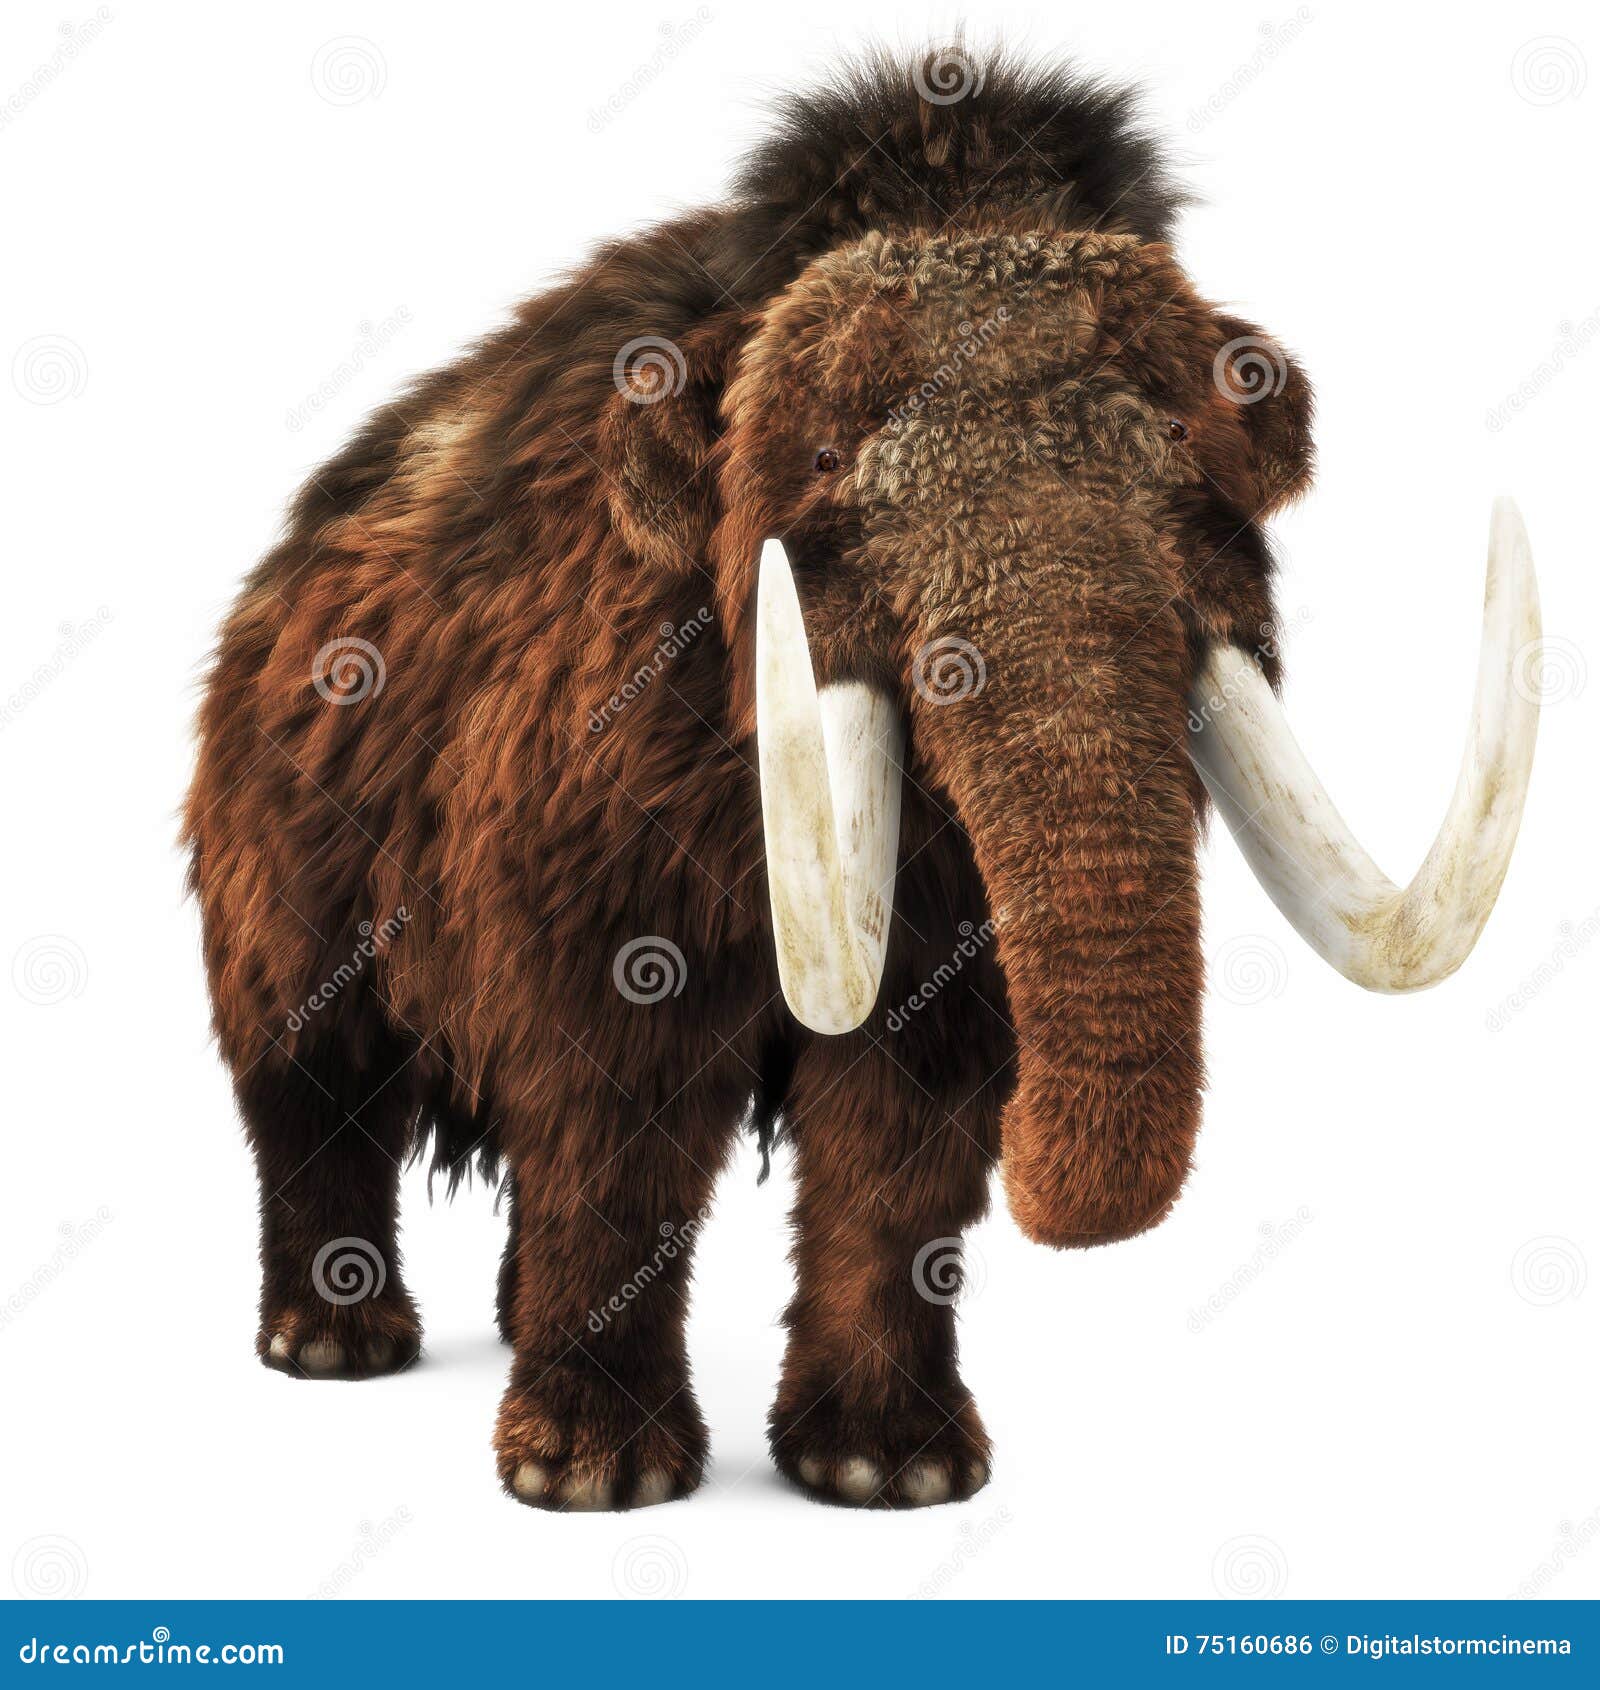 woolly mammoth on an  white background.